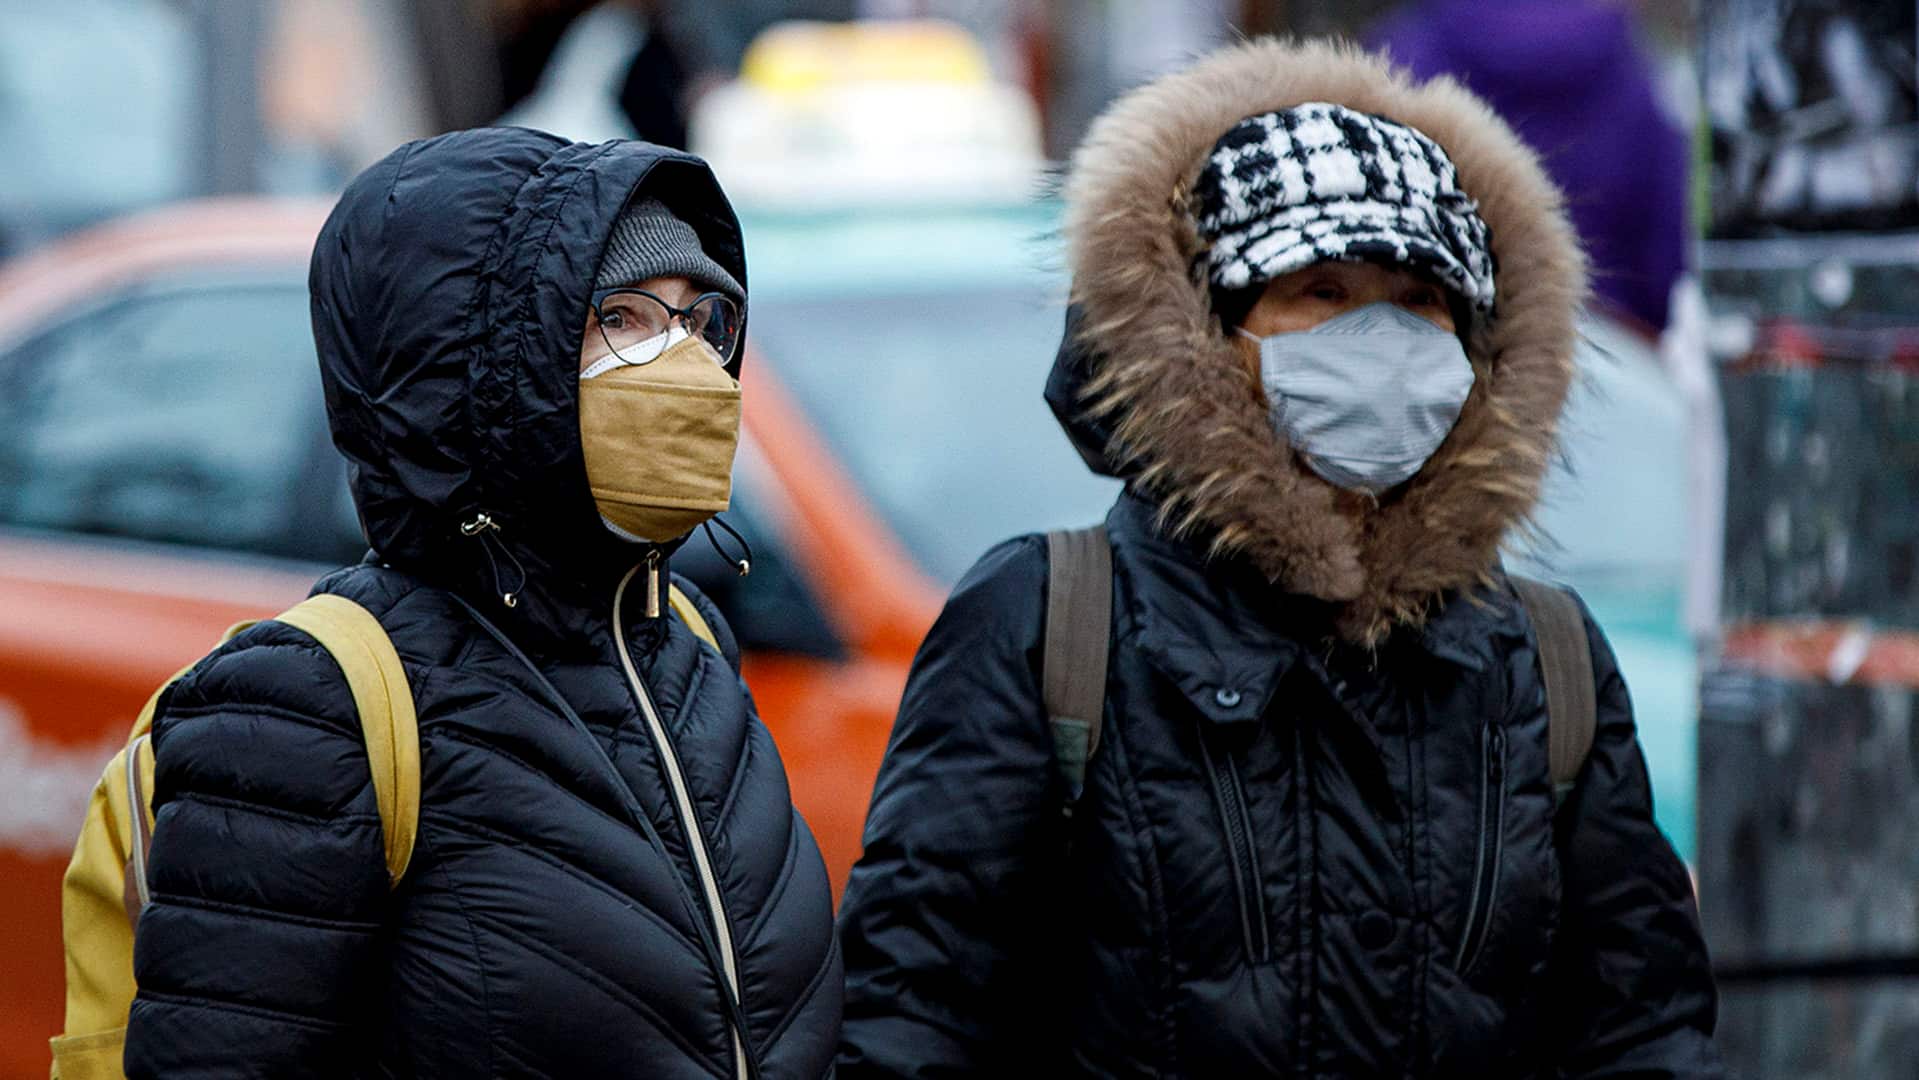 masks likely arent going anywhere in canada even as provinces ditch mandates 3